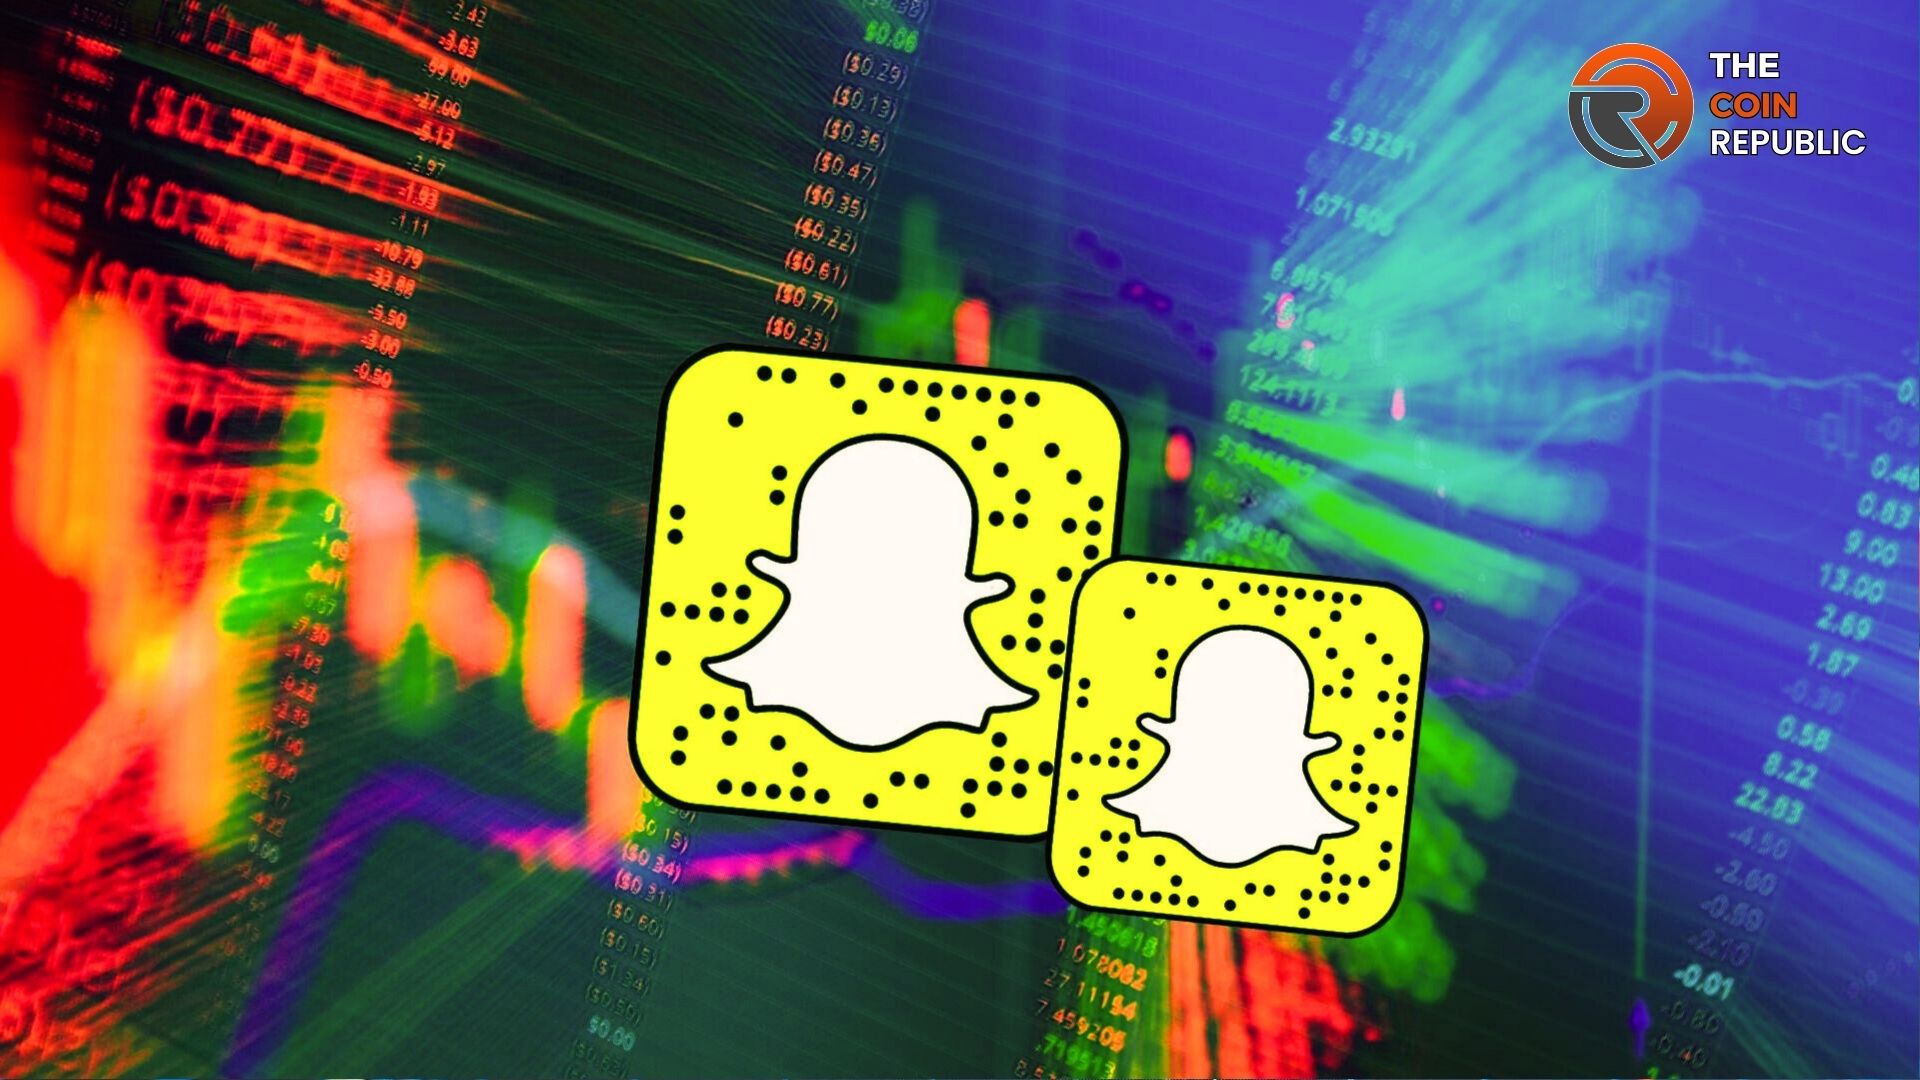 Snap Inc Stock Price Prediction: Will SNAP Hit $20?